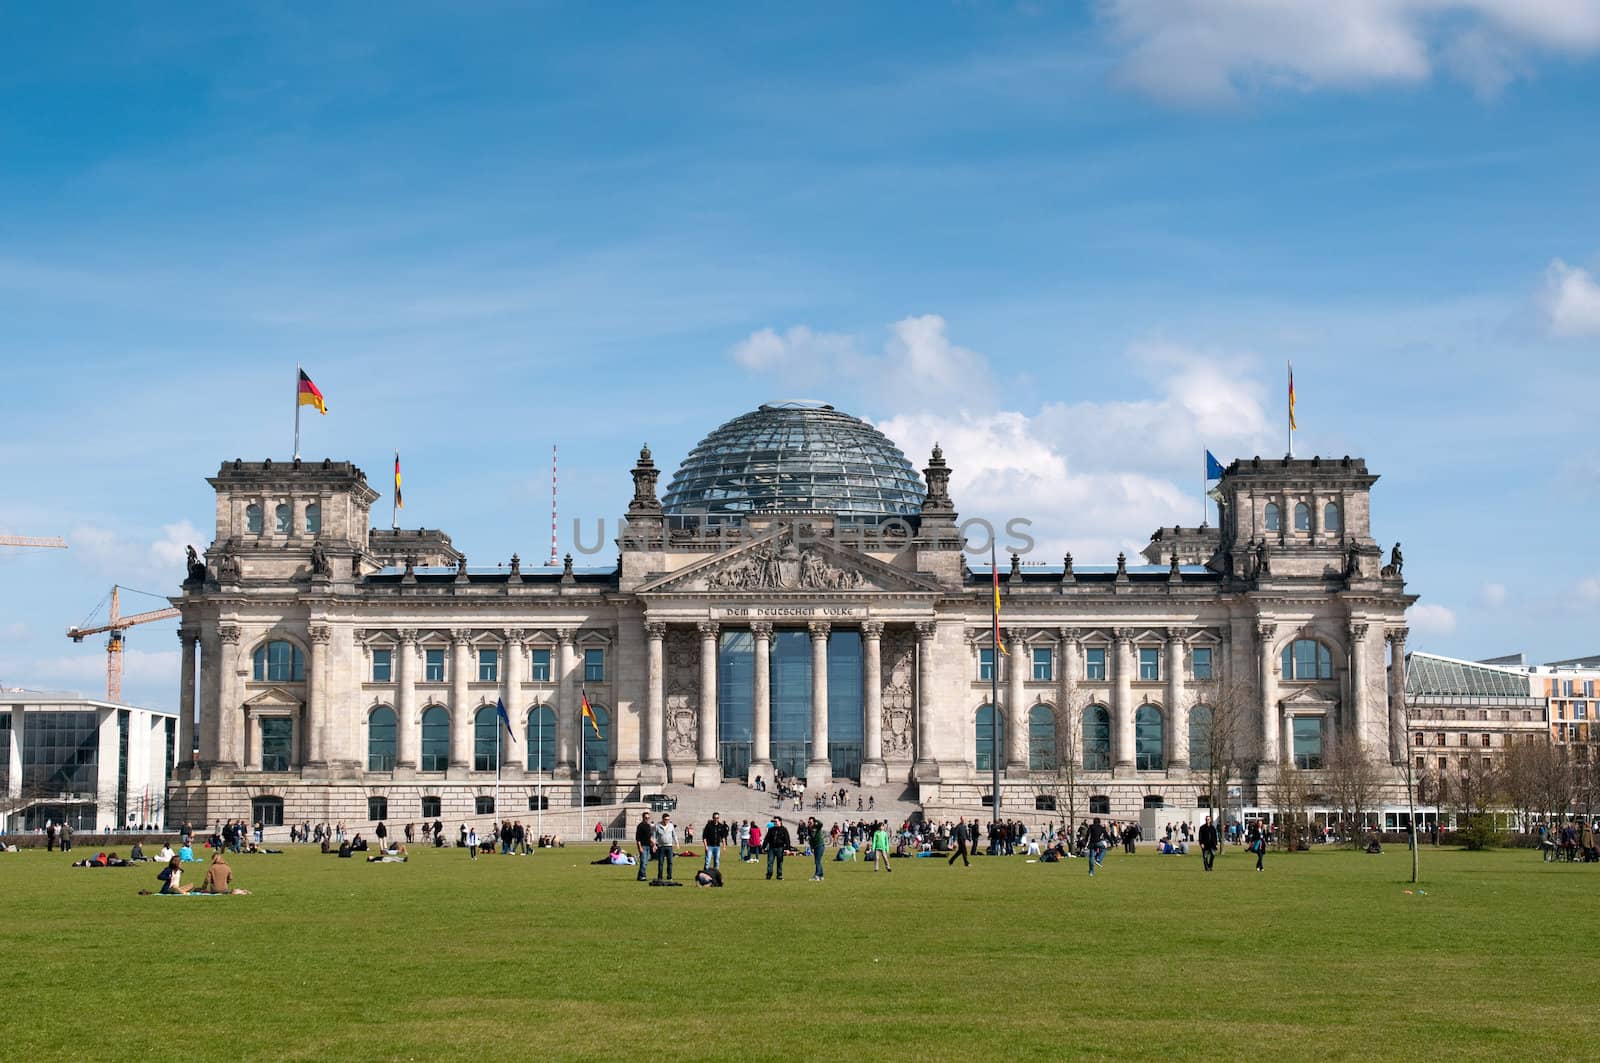 BERLIN, GERMANY - April, 14: The Reichstag building in Berlin, Germany